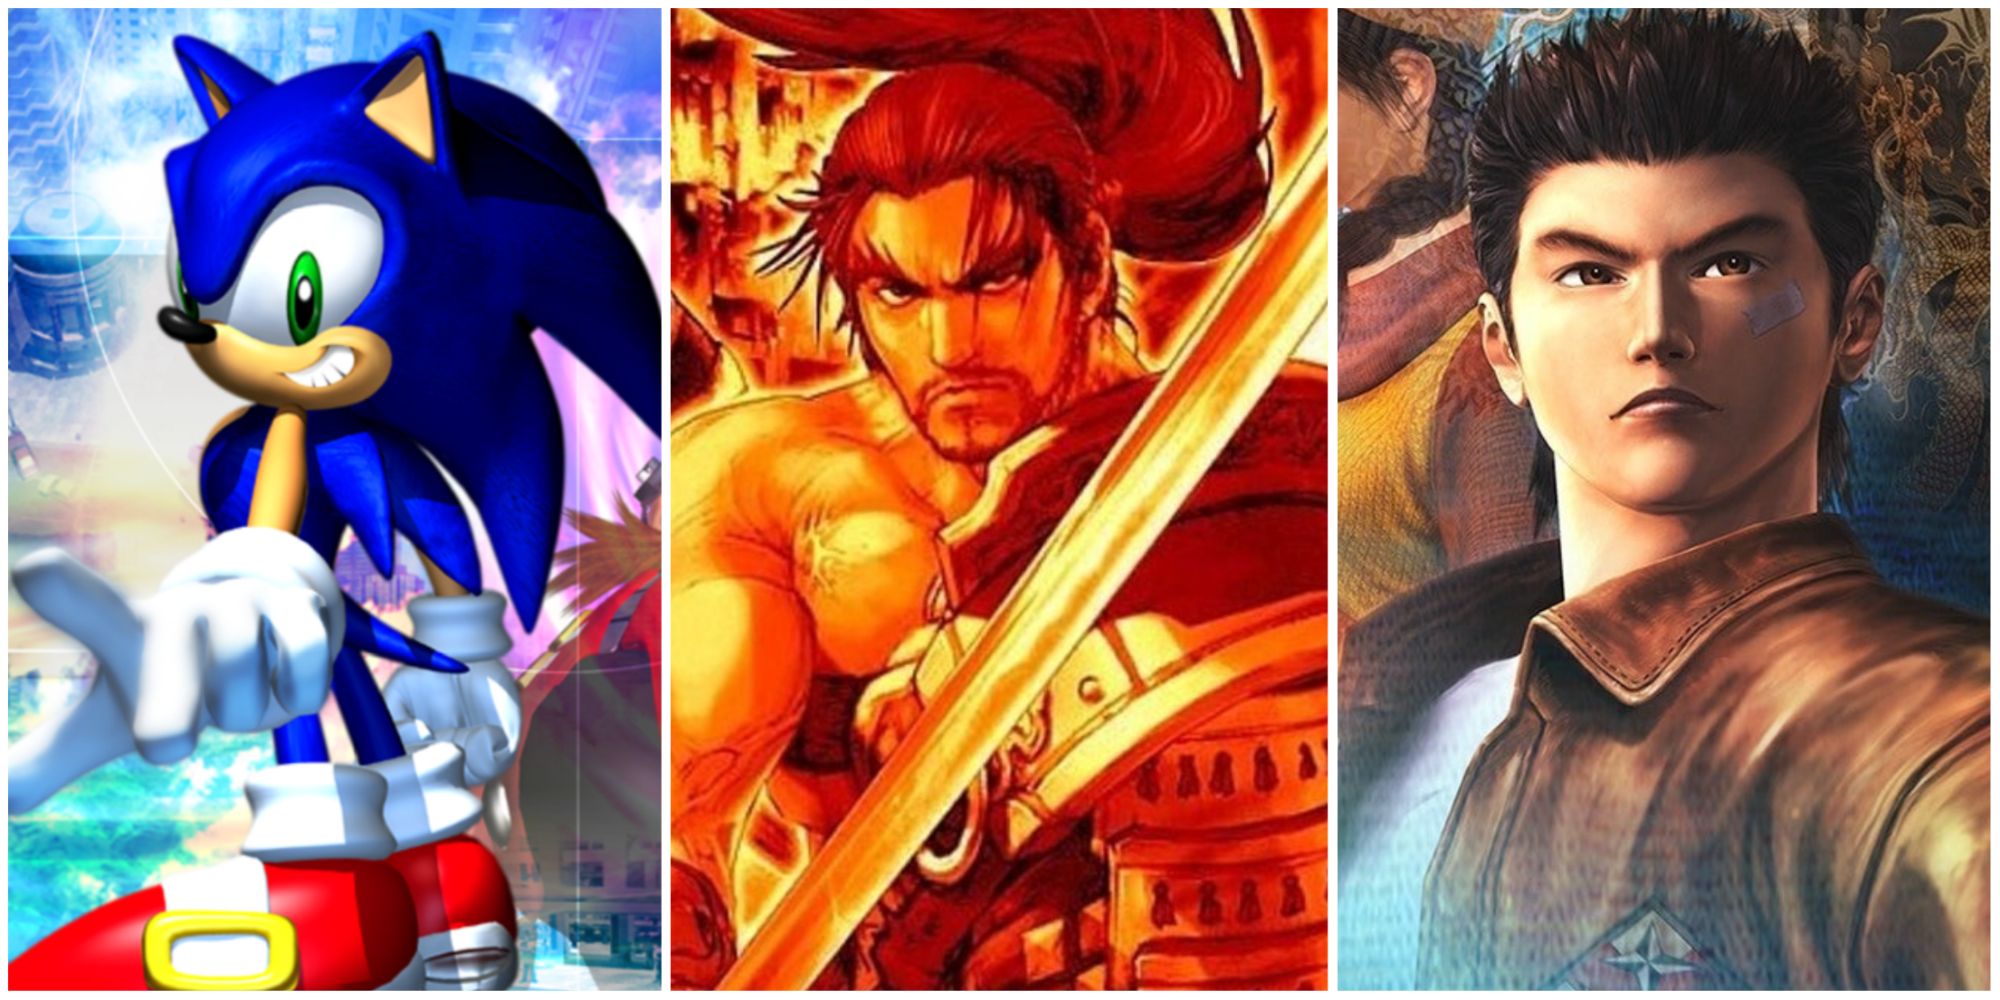 8 dreamcast games with graphics that have aged the best